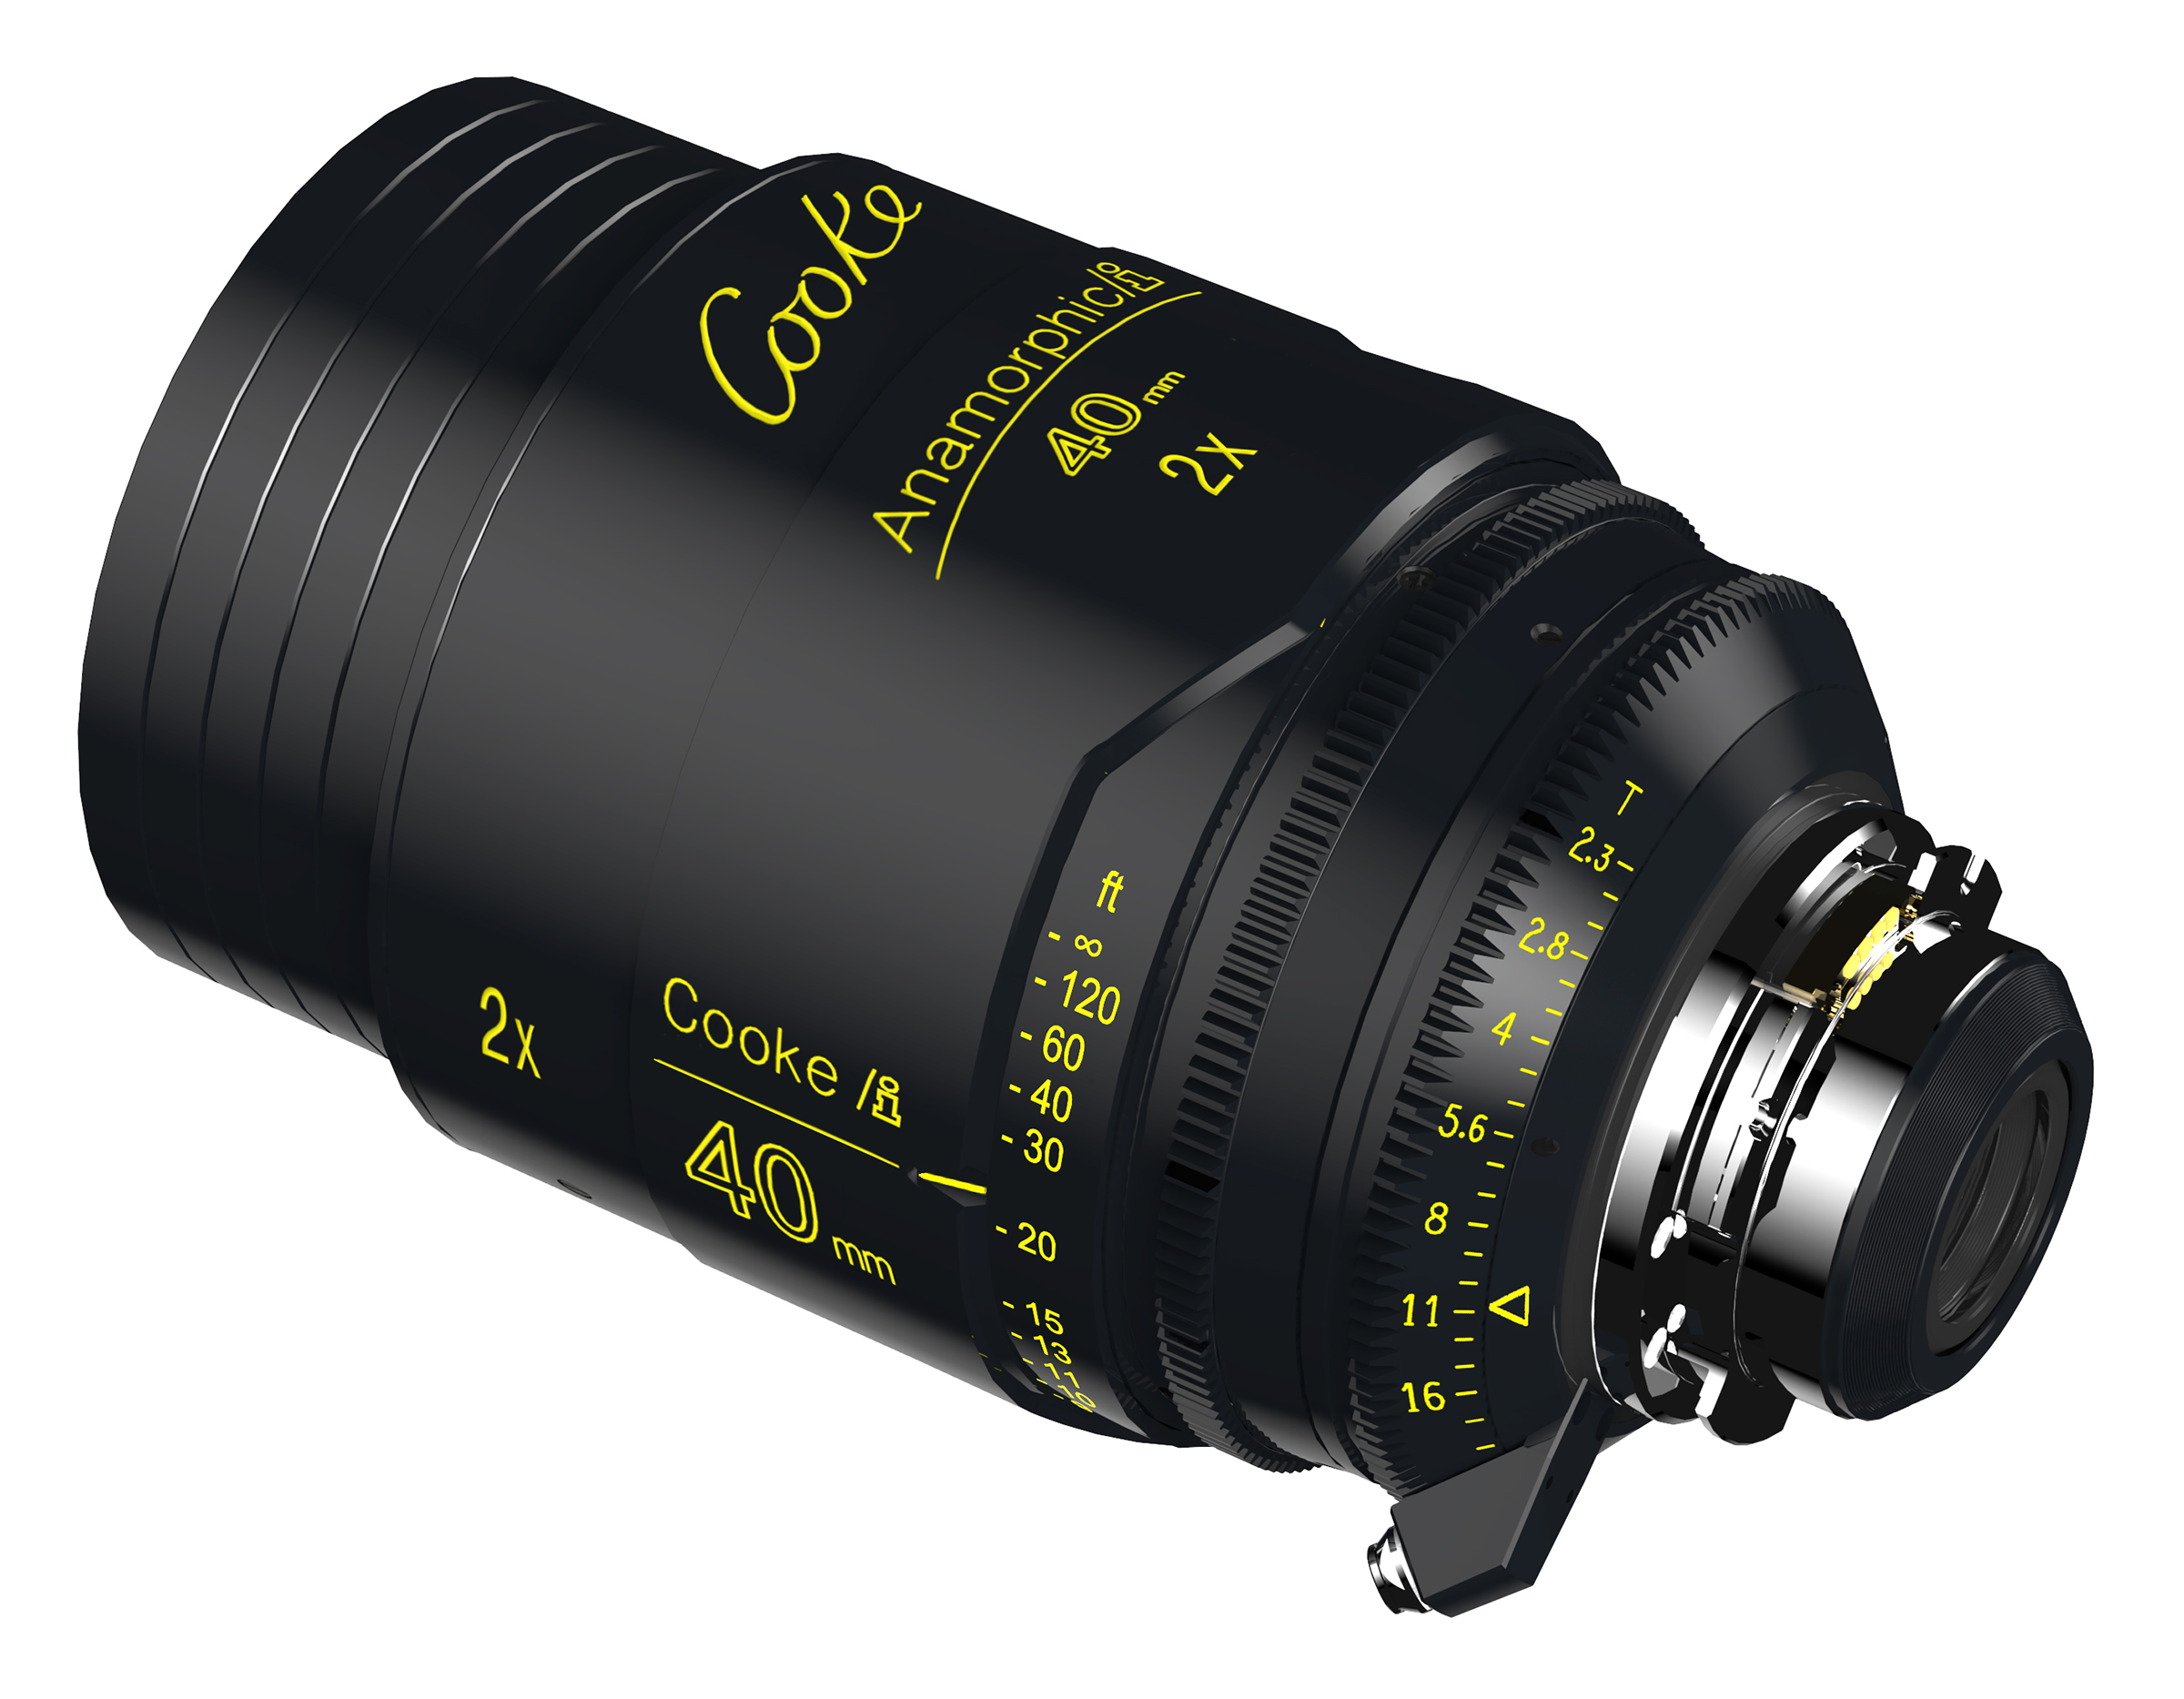 COOKE Anamorphic lenses compatible with CineMonitorHD evolution